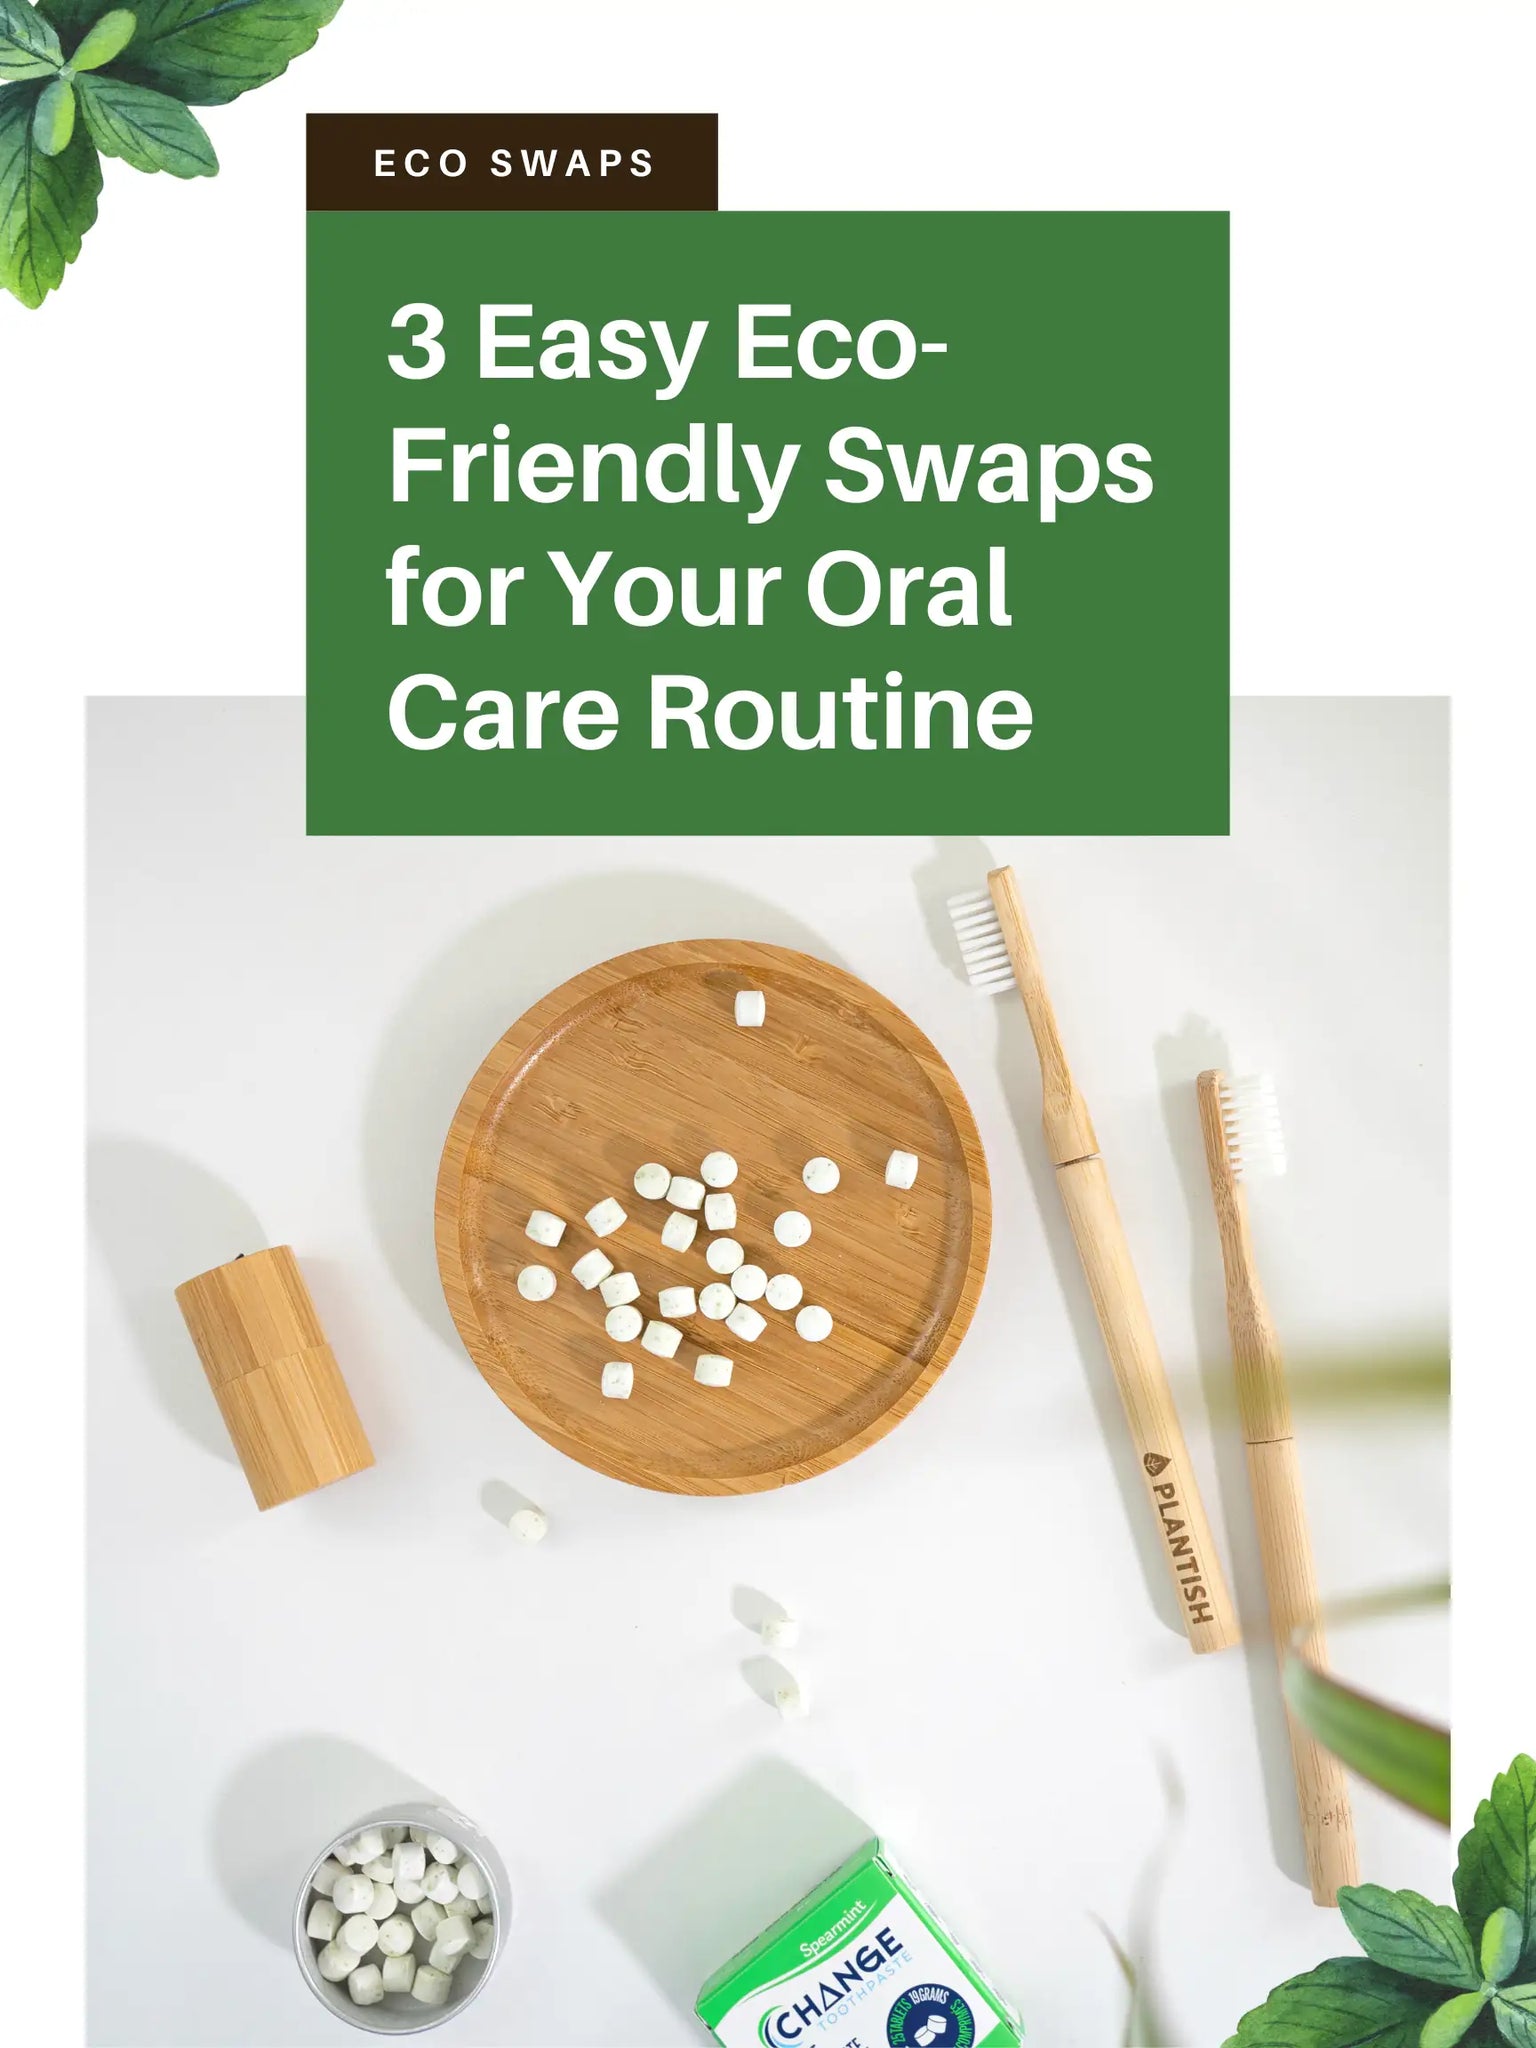 3 Easy Eco-Friendly Swaps for Your Oral Care Routine